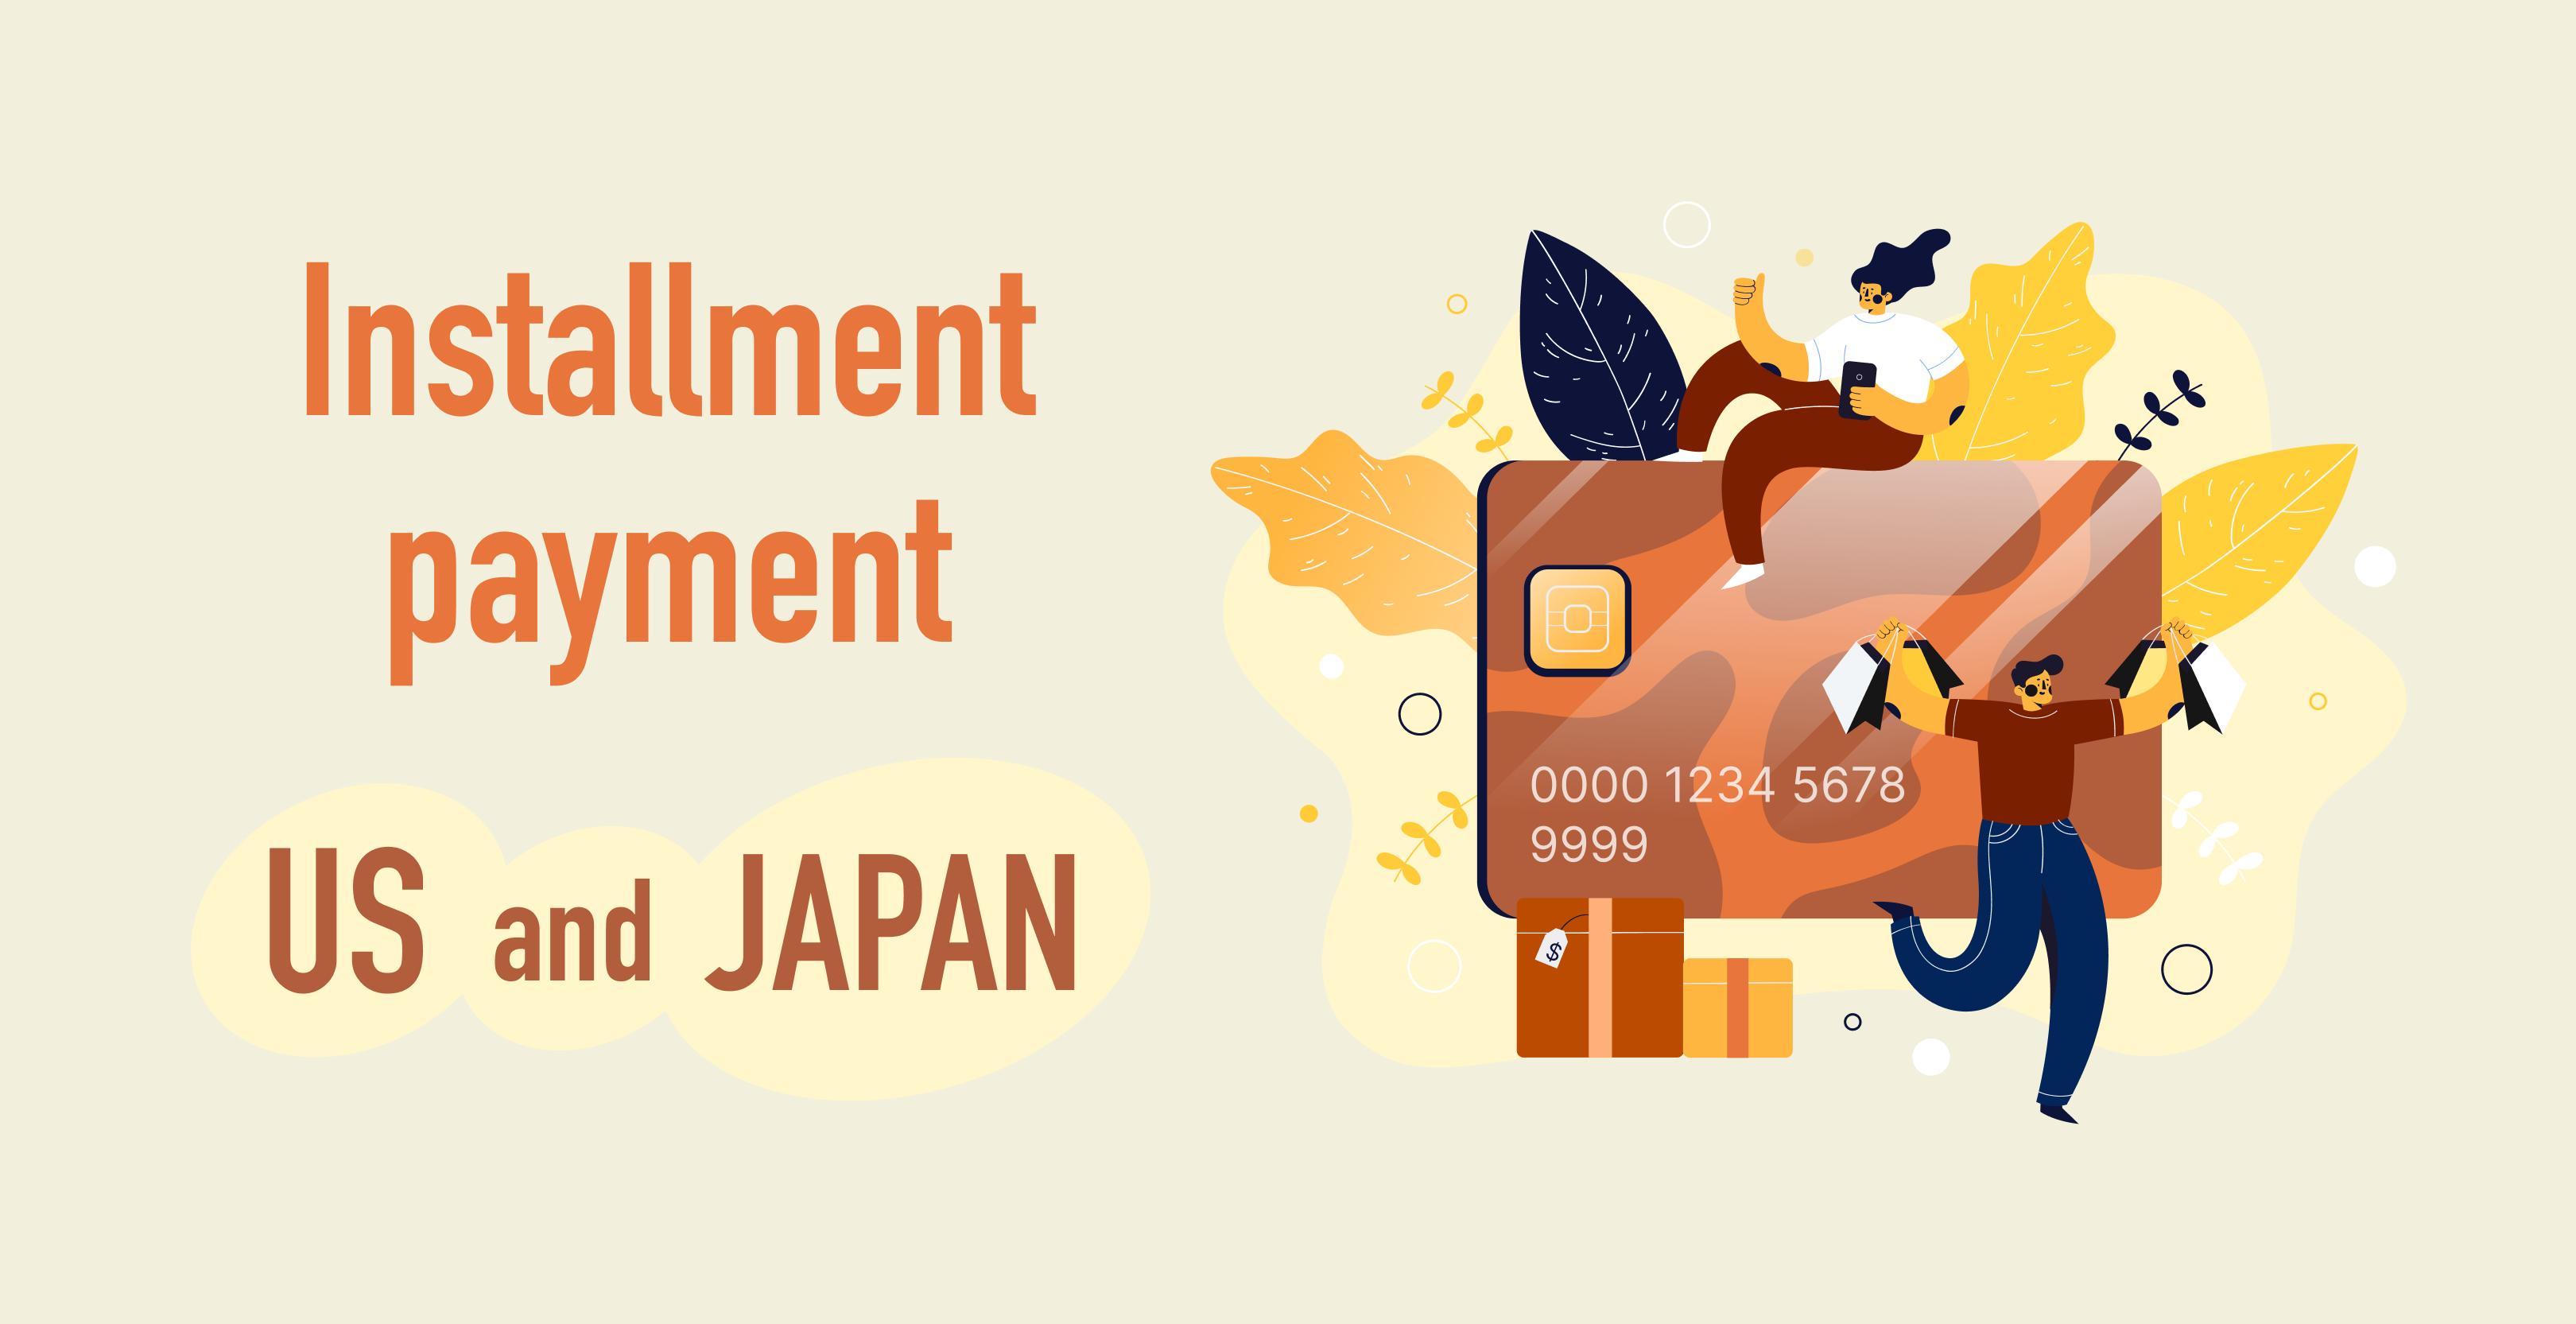 Introduction of installment payment with SHOPIFY! About the differences between installments that can be done in the United States and Japan